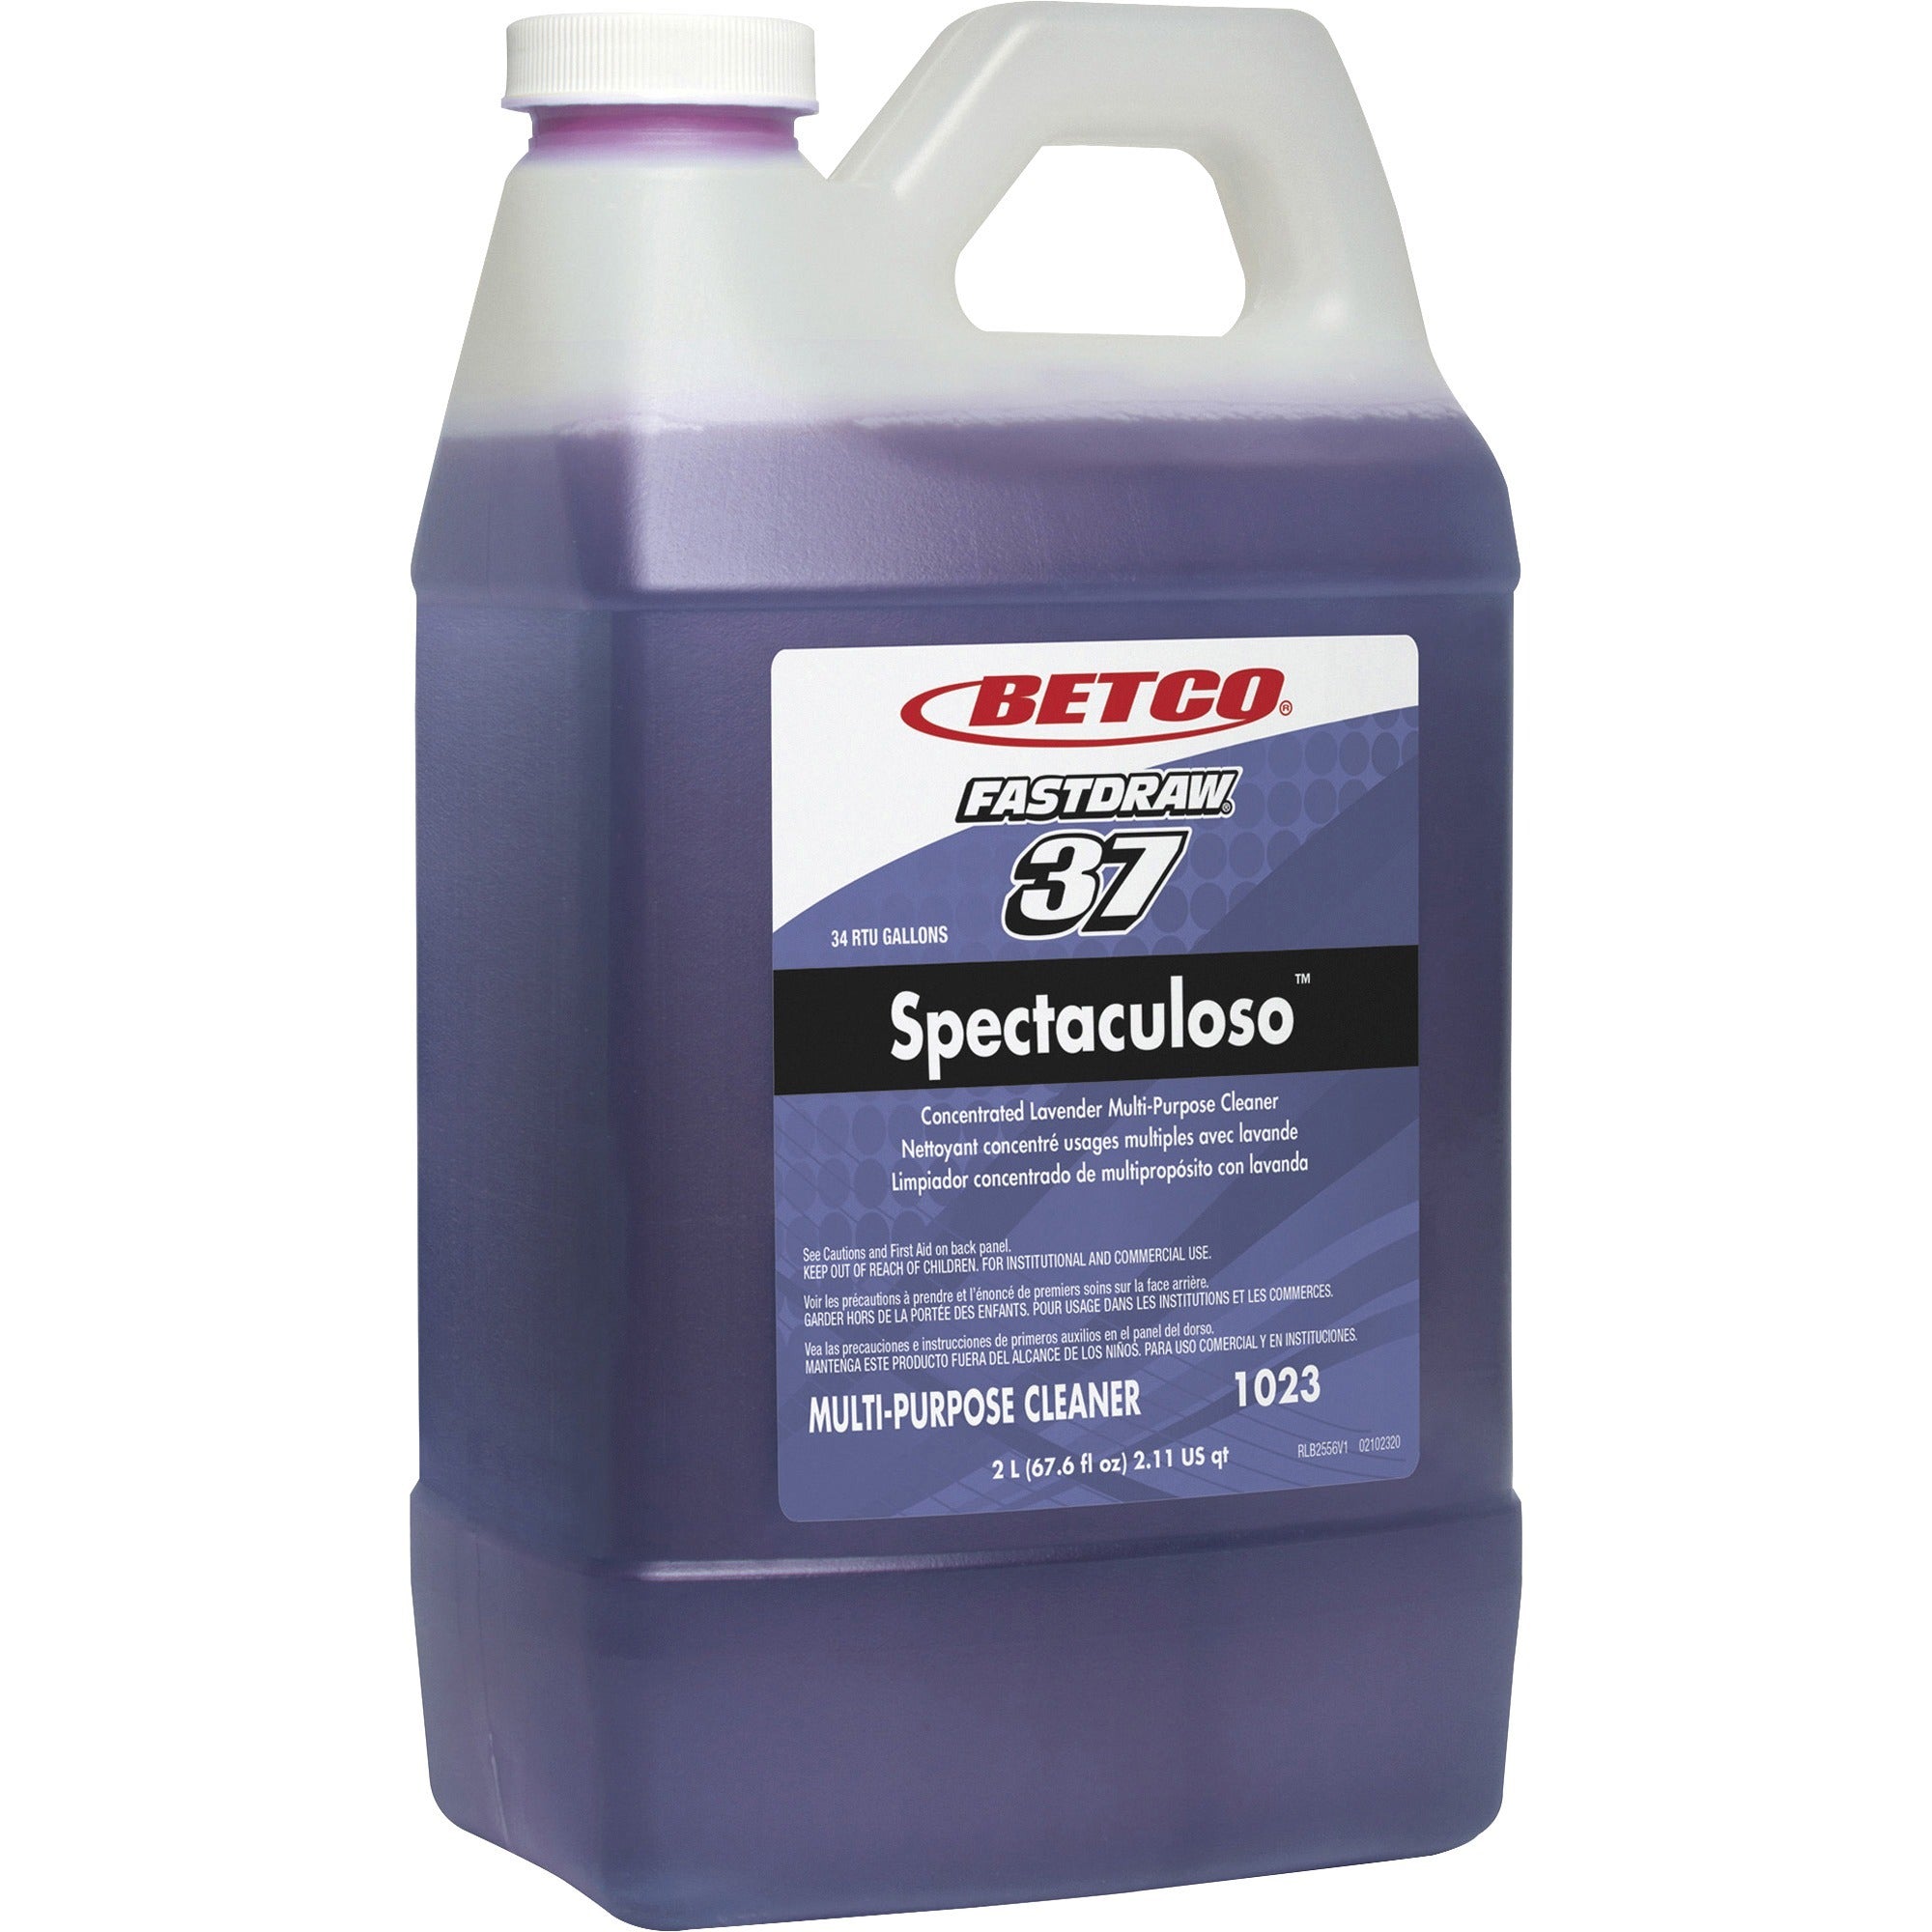 Betco Spectaculoso General Cleaner - FASTDRAW 37 - Concentrate - 67.6 fl oz (2.1 quart) - Lavender Scent - 4 / Carton - Deodorize, Phosphate-free, Rinse-free, Spill Proof, Chemical Resistant, Butyl-free - Purple - 2